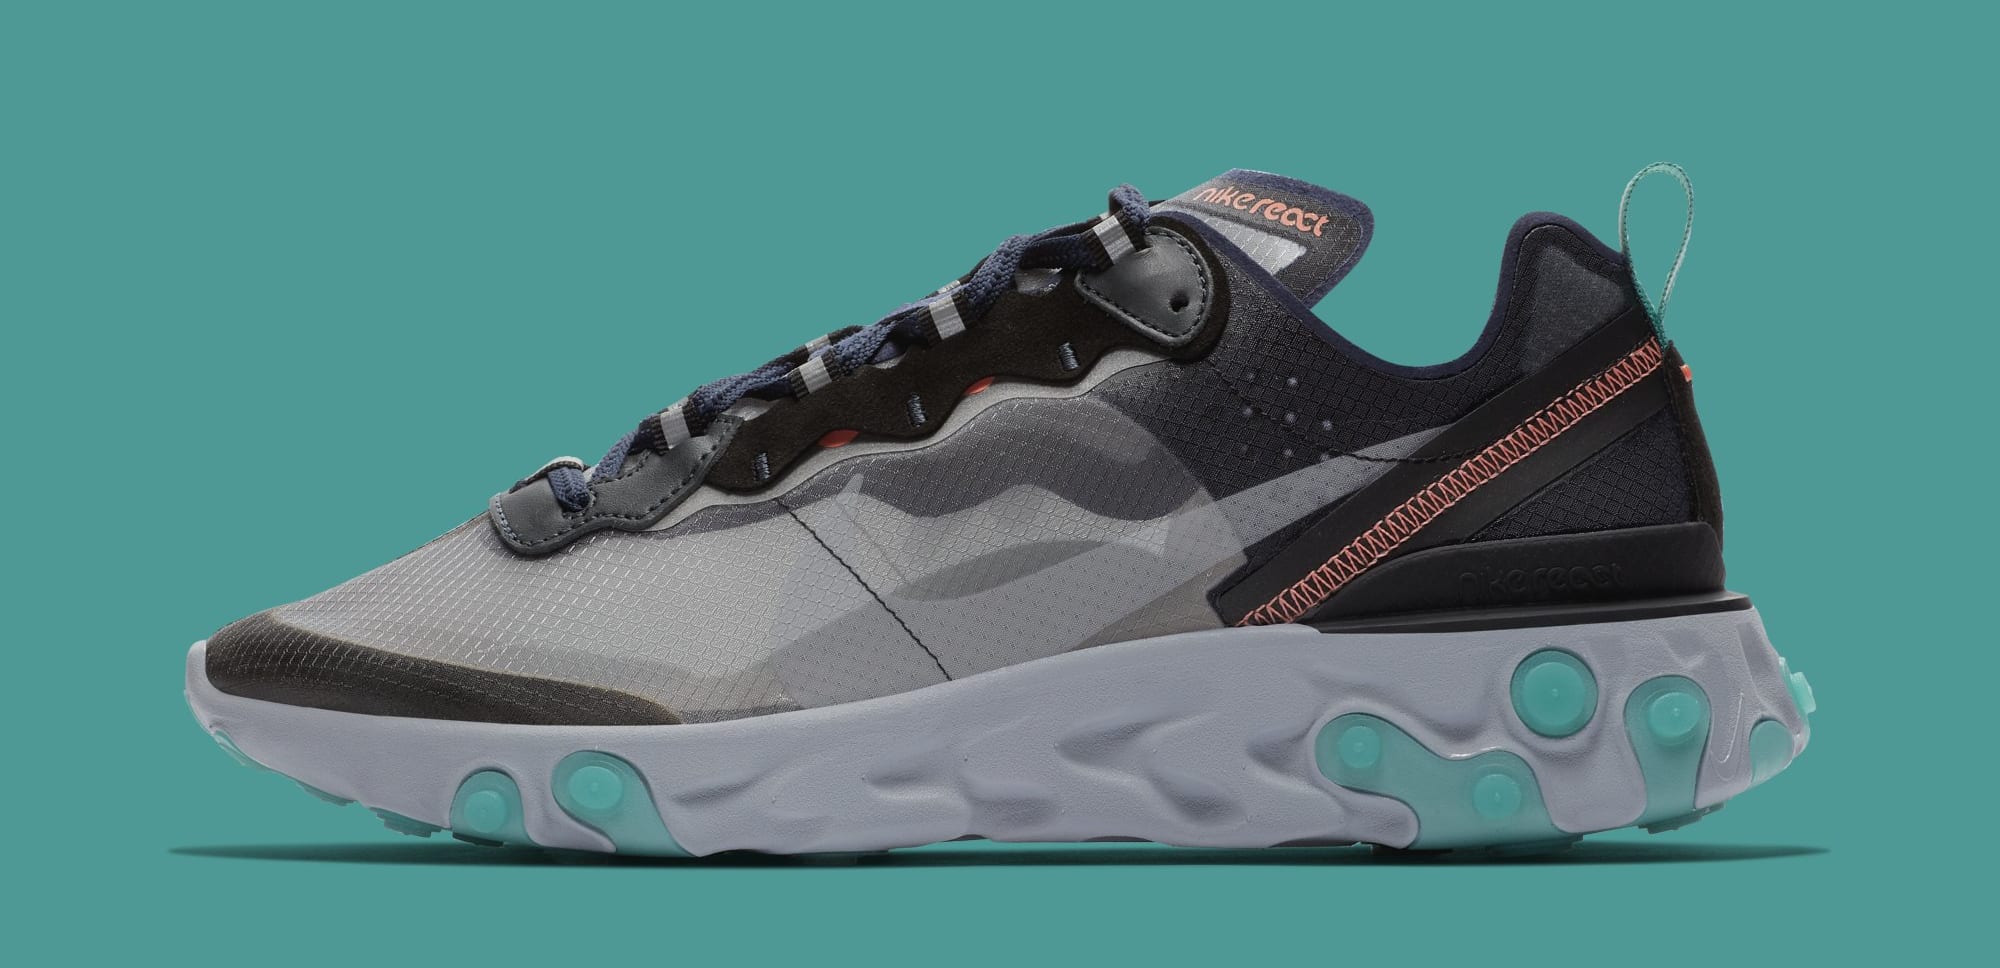 Nike React Element 87 AQ1090-005 (Lateral)